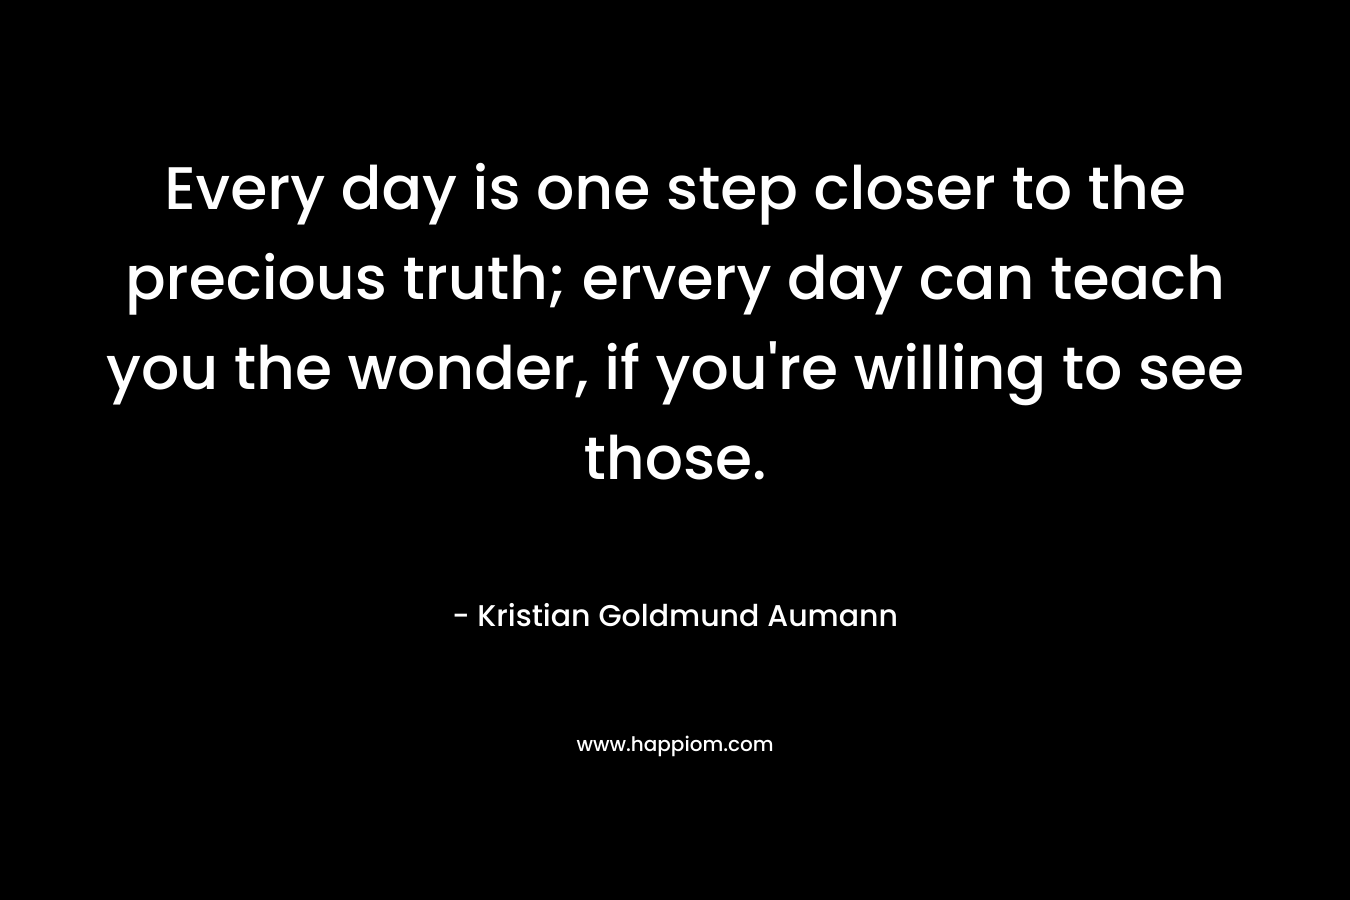 Every day is one step closer to the precious truth; ervery day can teach you the wonder, if you’re willing to see those. – Kristian Goldmund Aumann